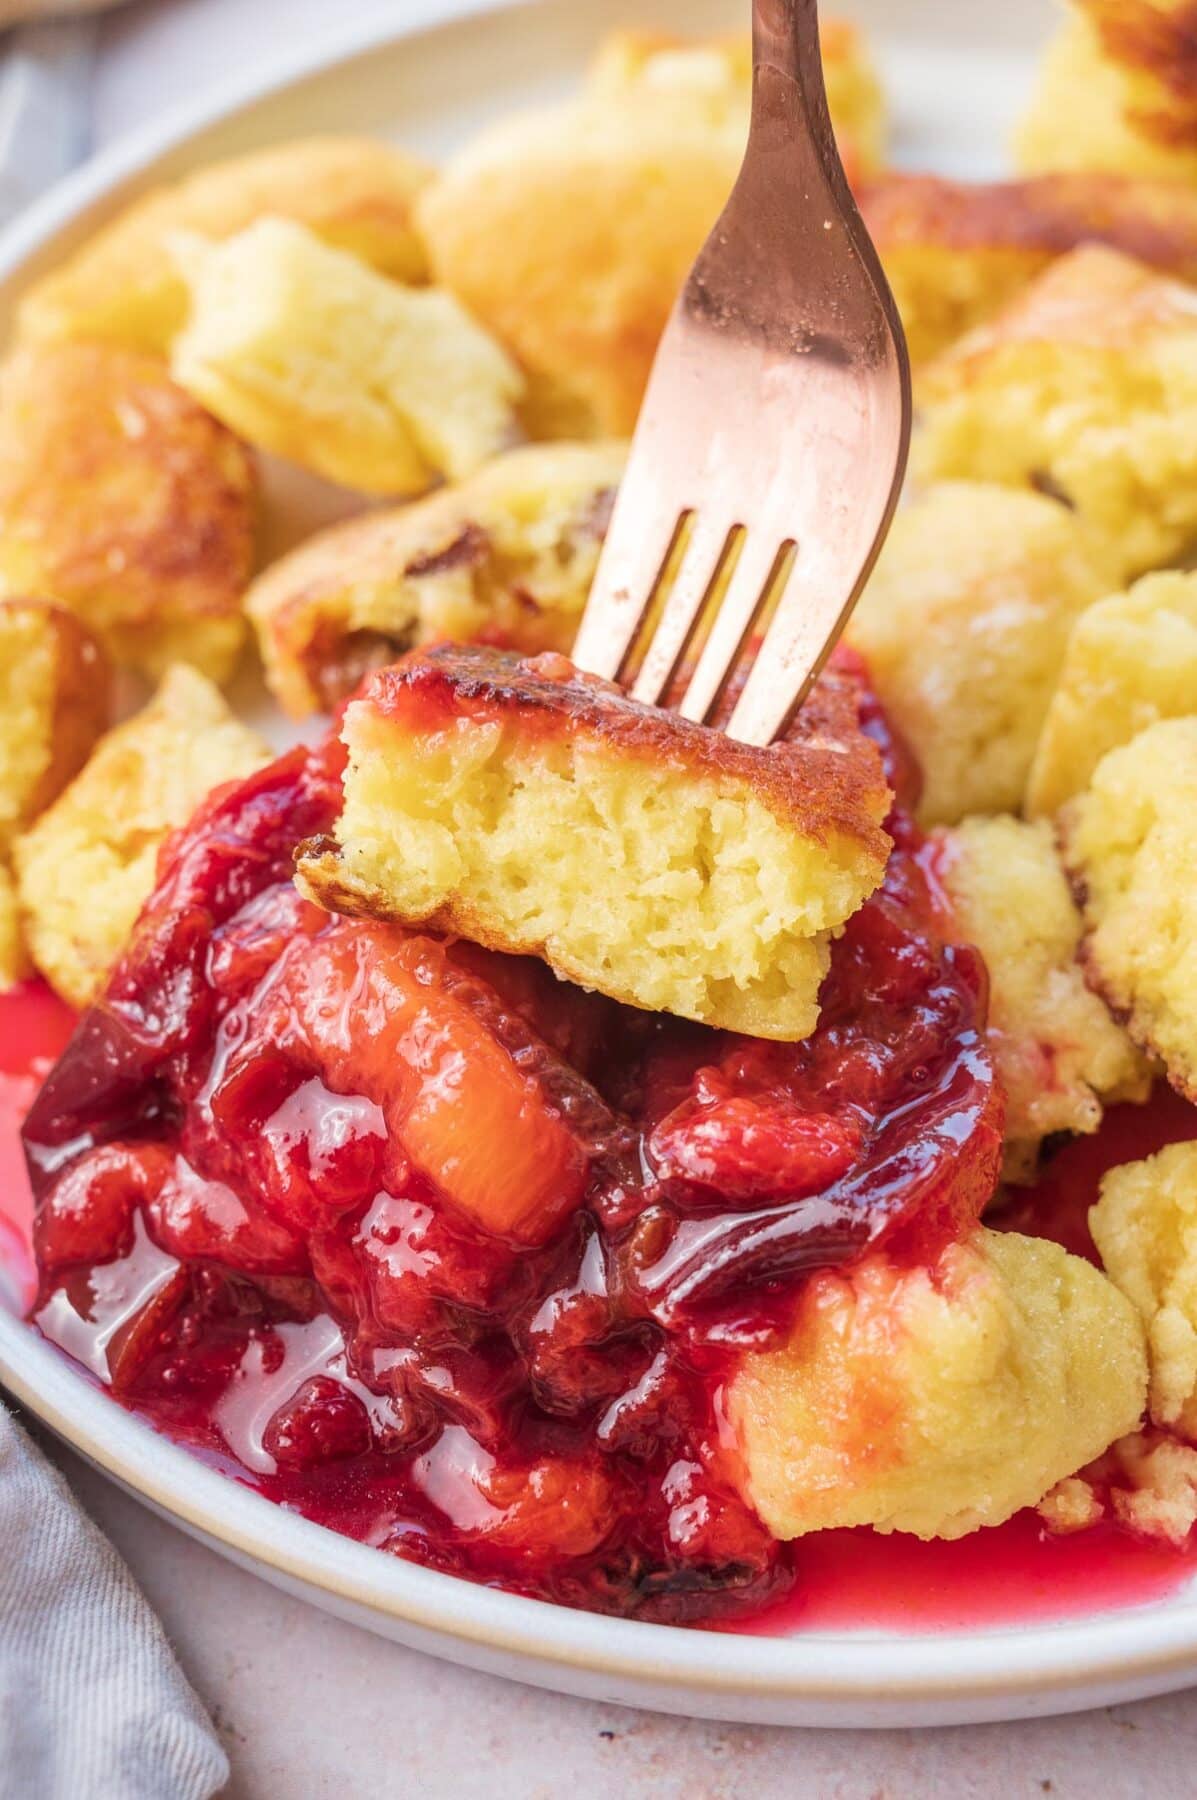 A piece of Kaiserschmarrn stuck on a fork is being dipped in plum compote.